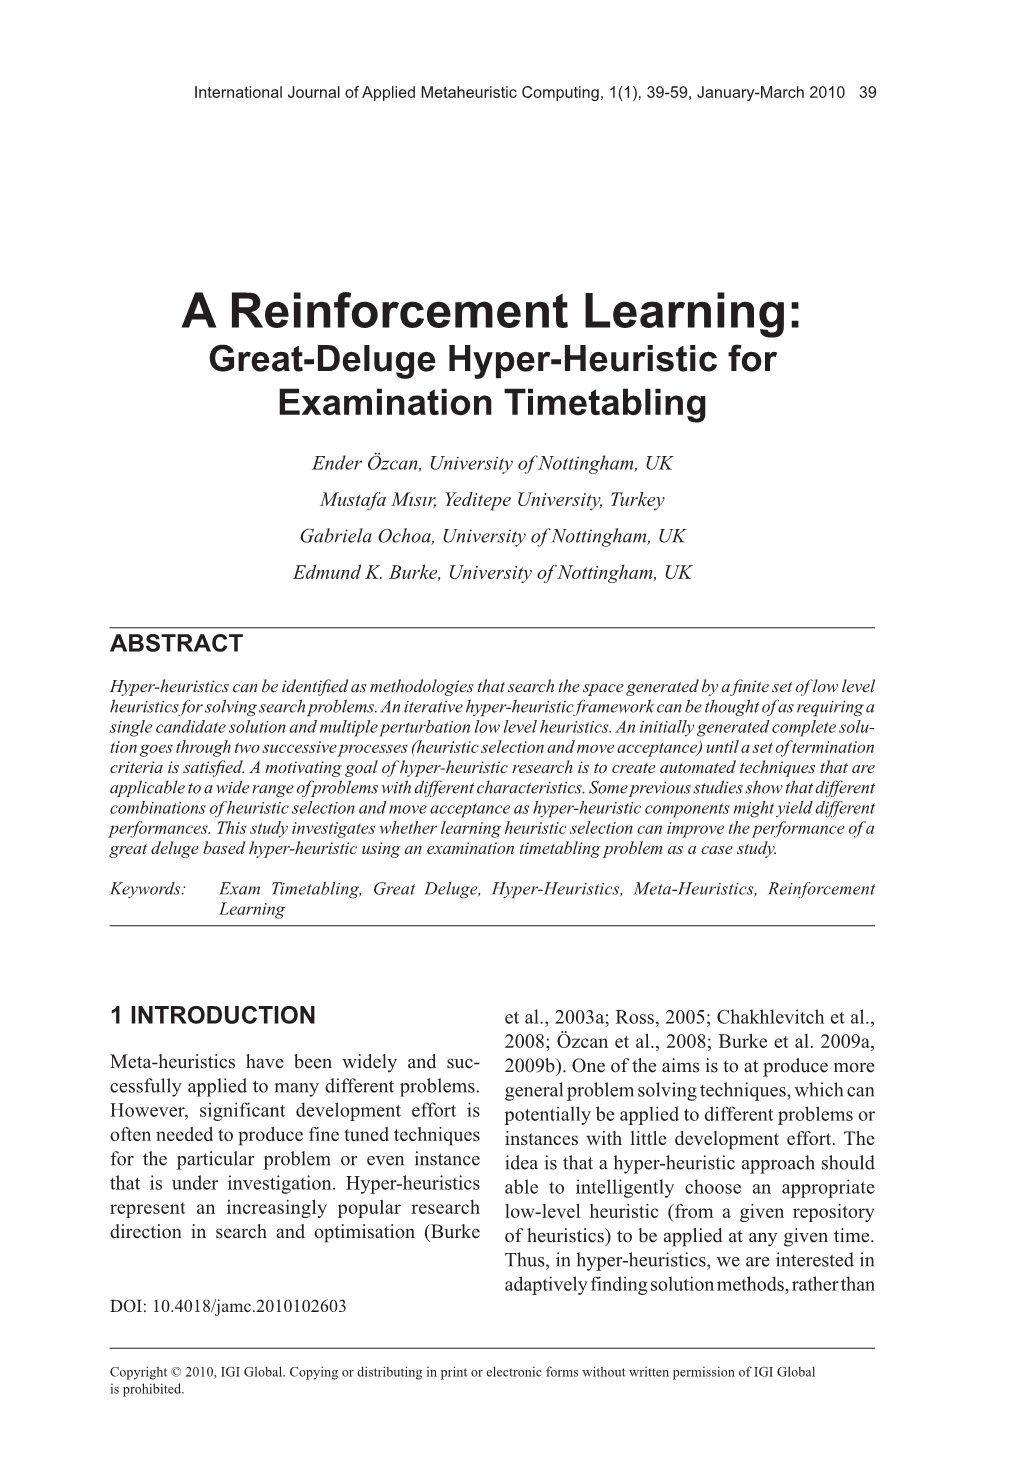 A Reinforcement Learning: Great-Deluge Hyper-Heuristic for Examination Timetabling